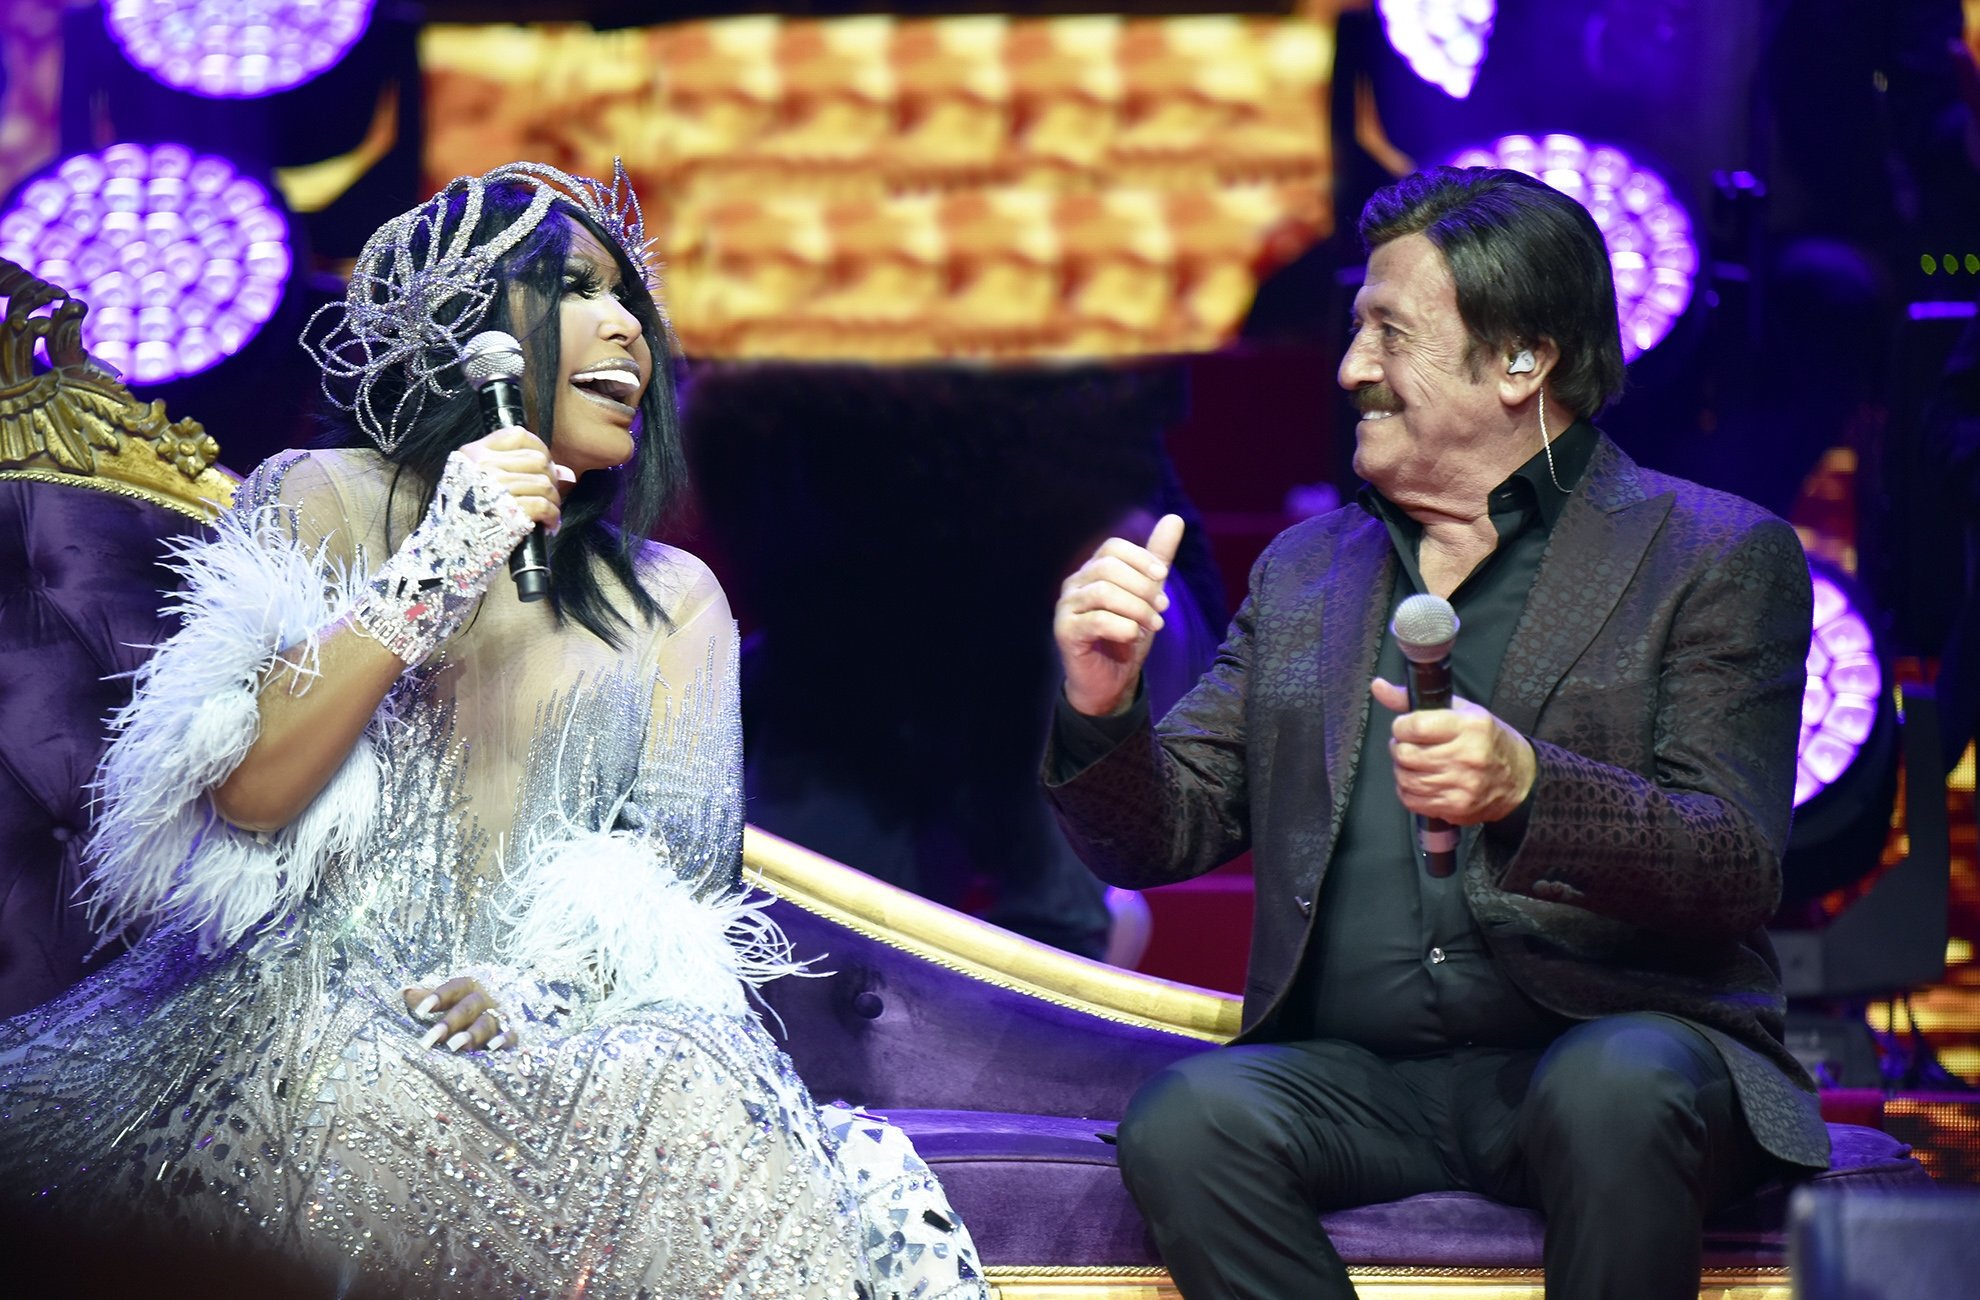 Bülent Ersoy (L) and singer Selami Şahin perform on stage at the Cemil Topuzlu Open-Air Theater, in Harbiye, Istanbul, Turkey. (Archive Photo)